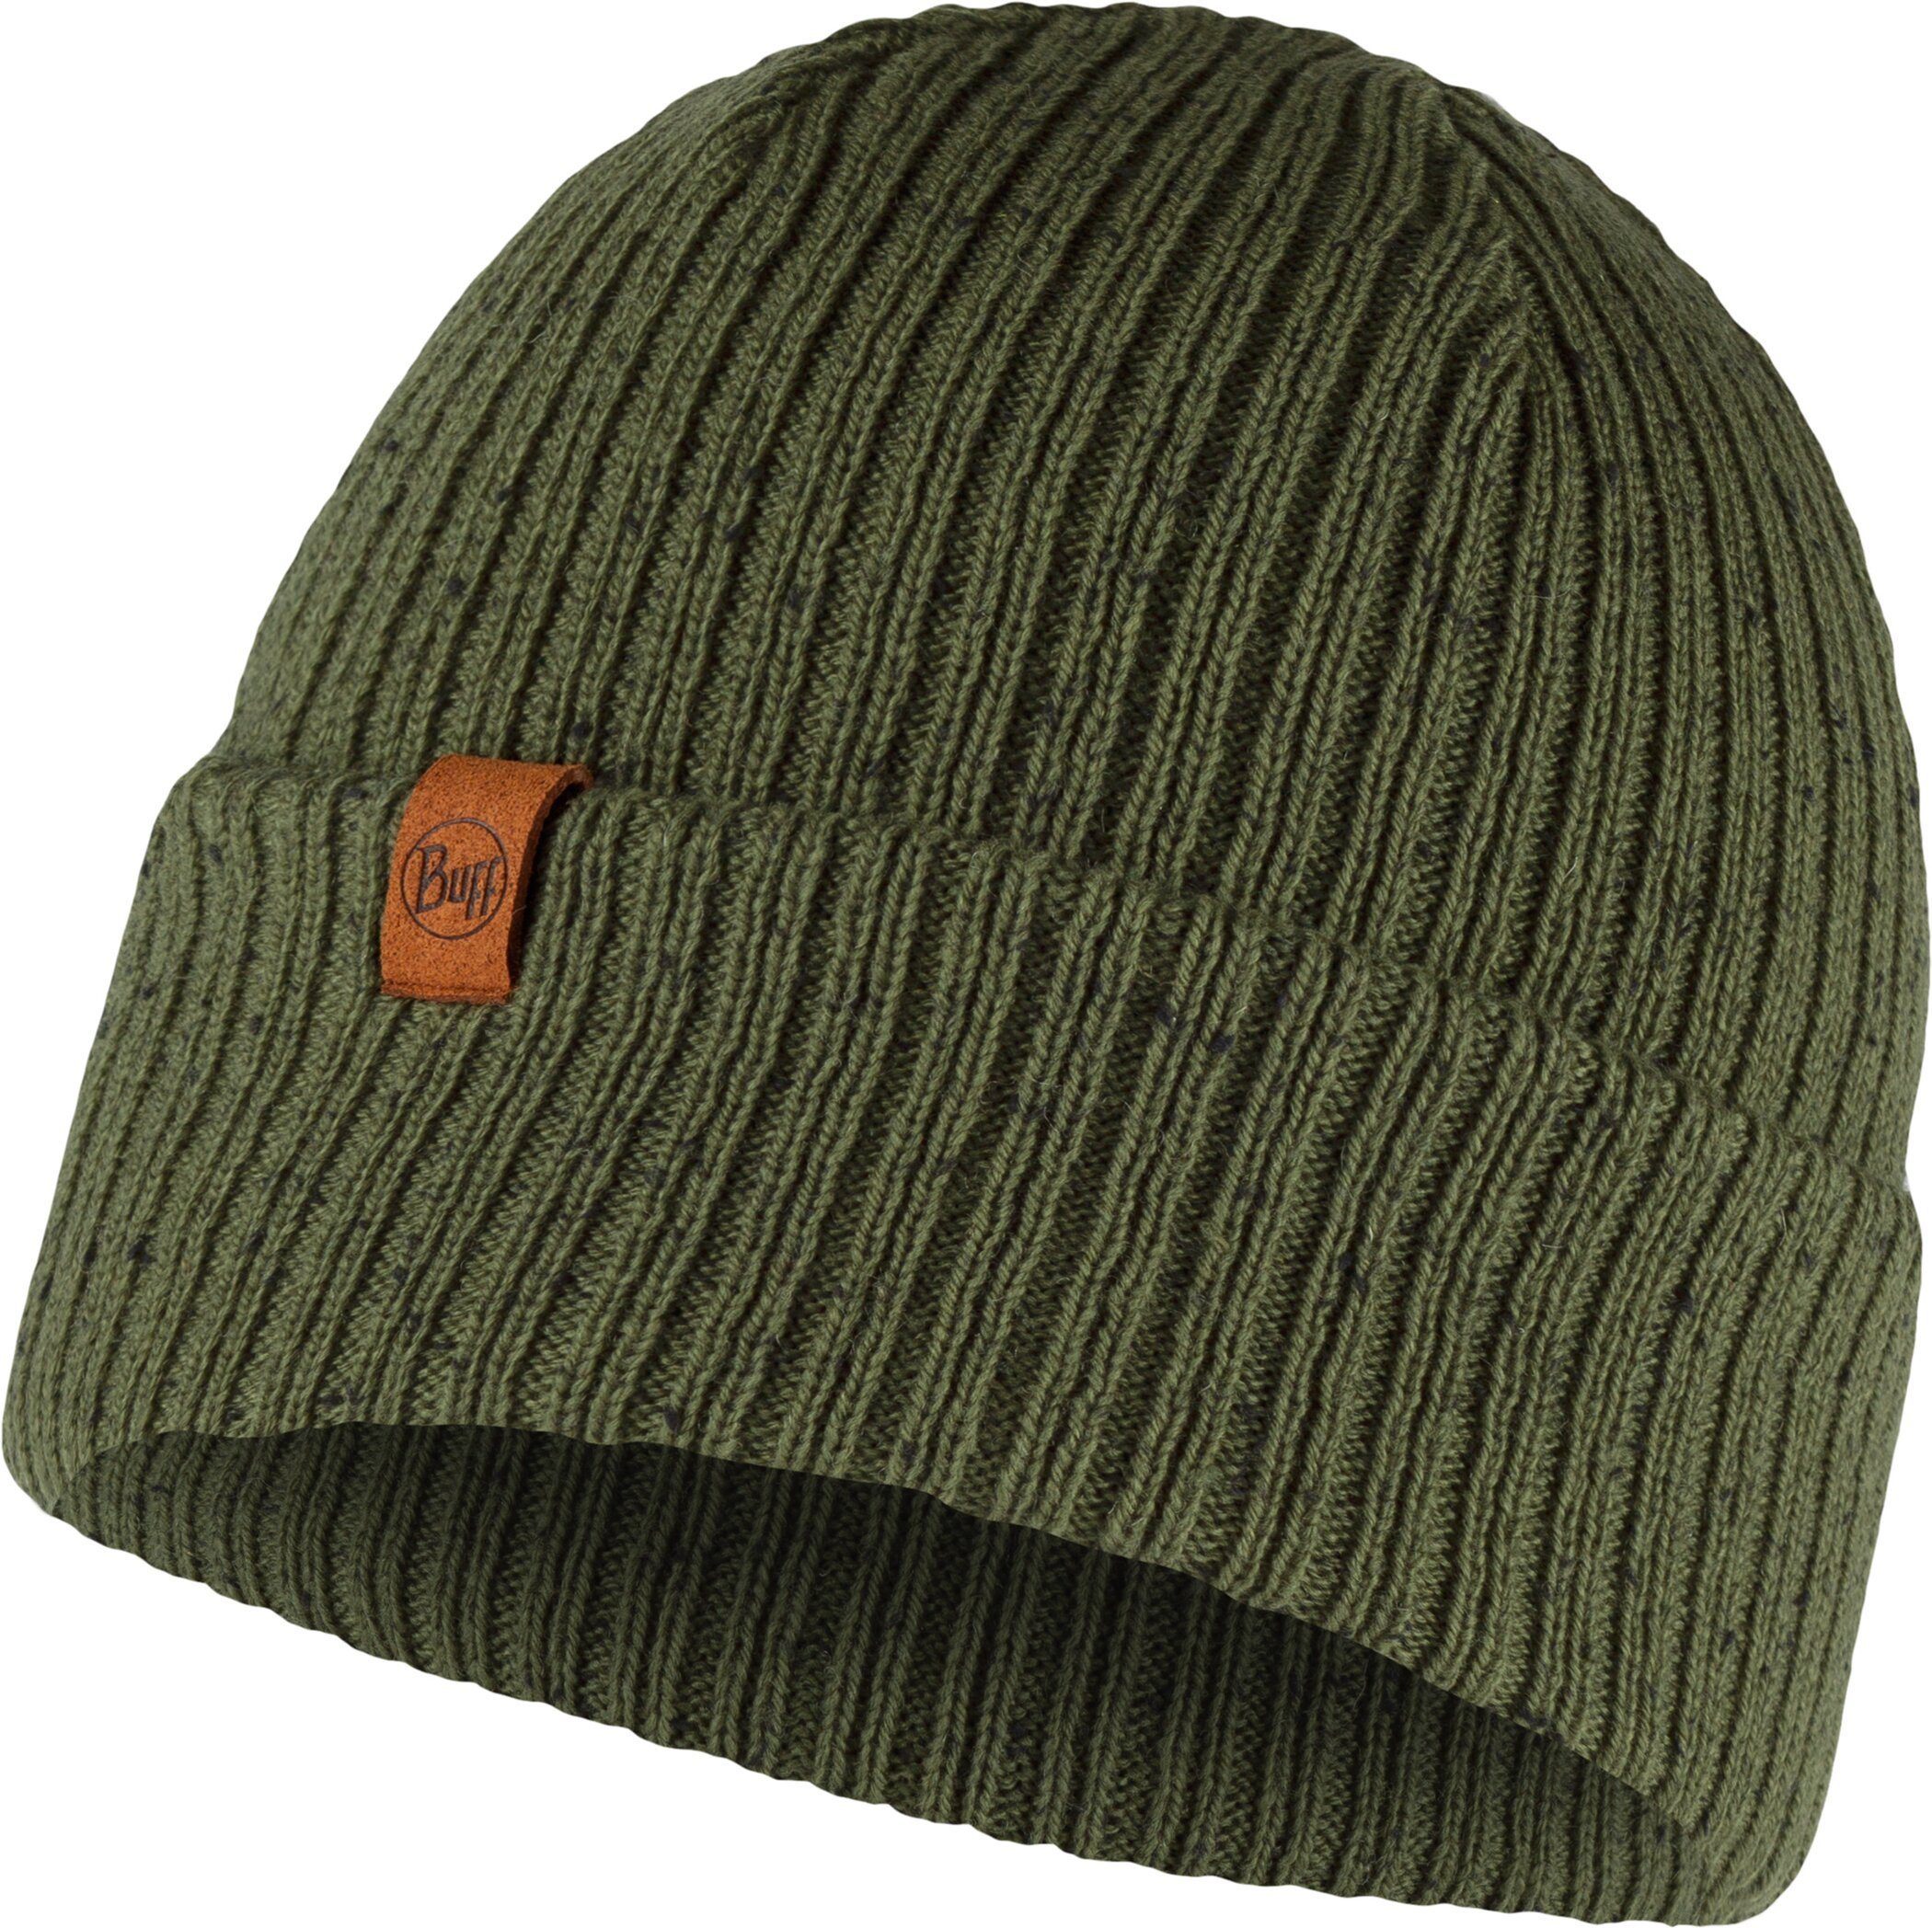 Buff Beanie Knitted Beanie SOLID CAMOUFLAGE